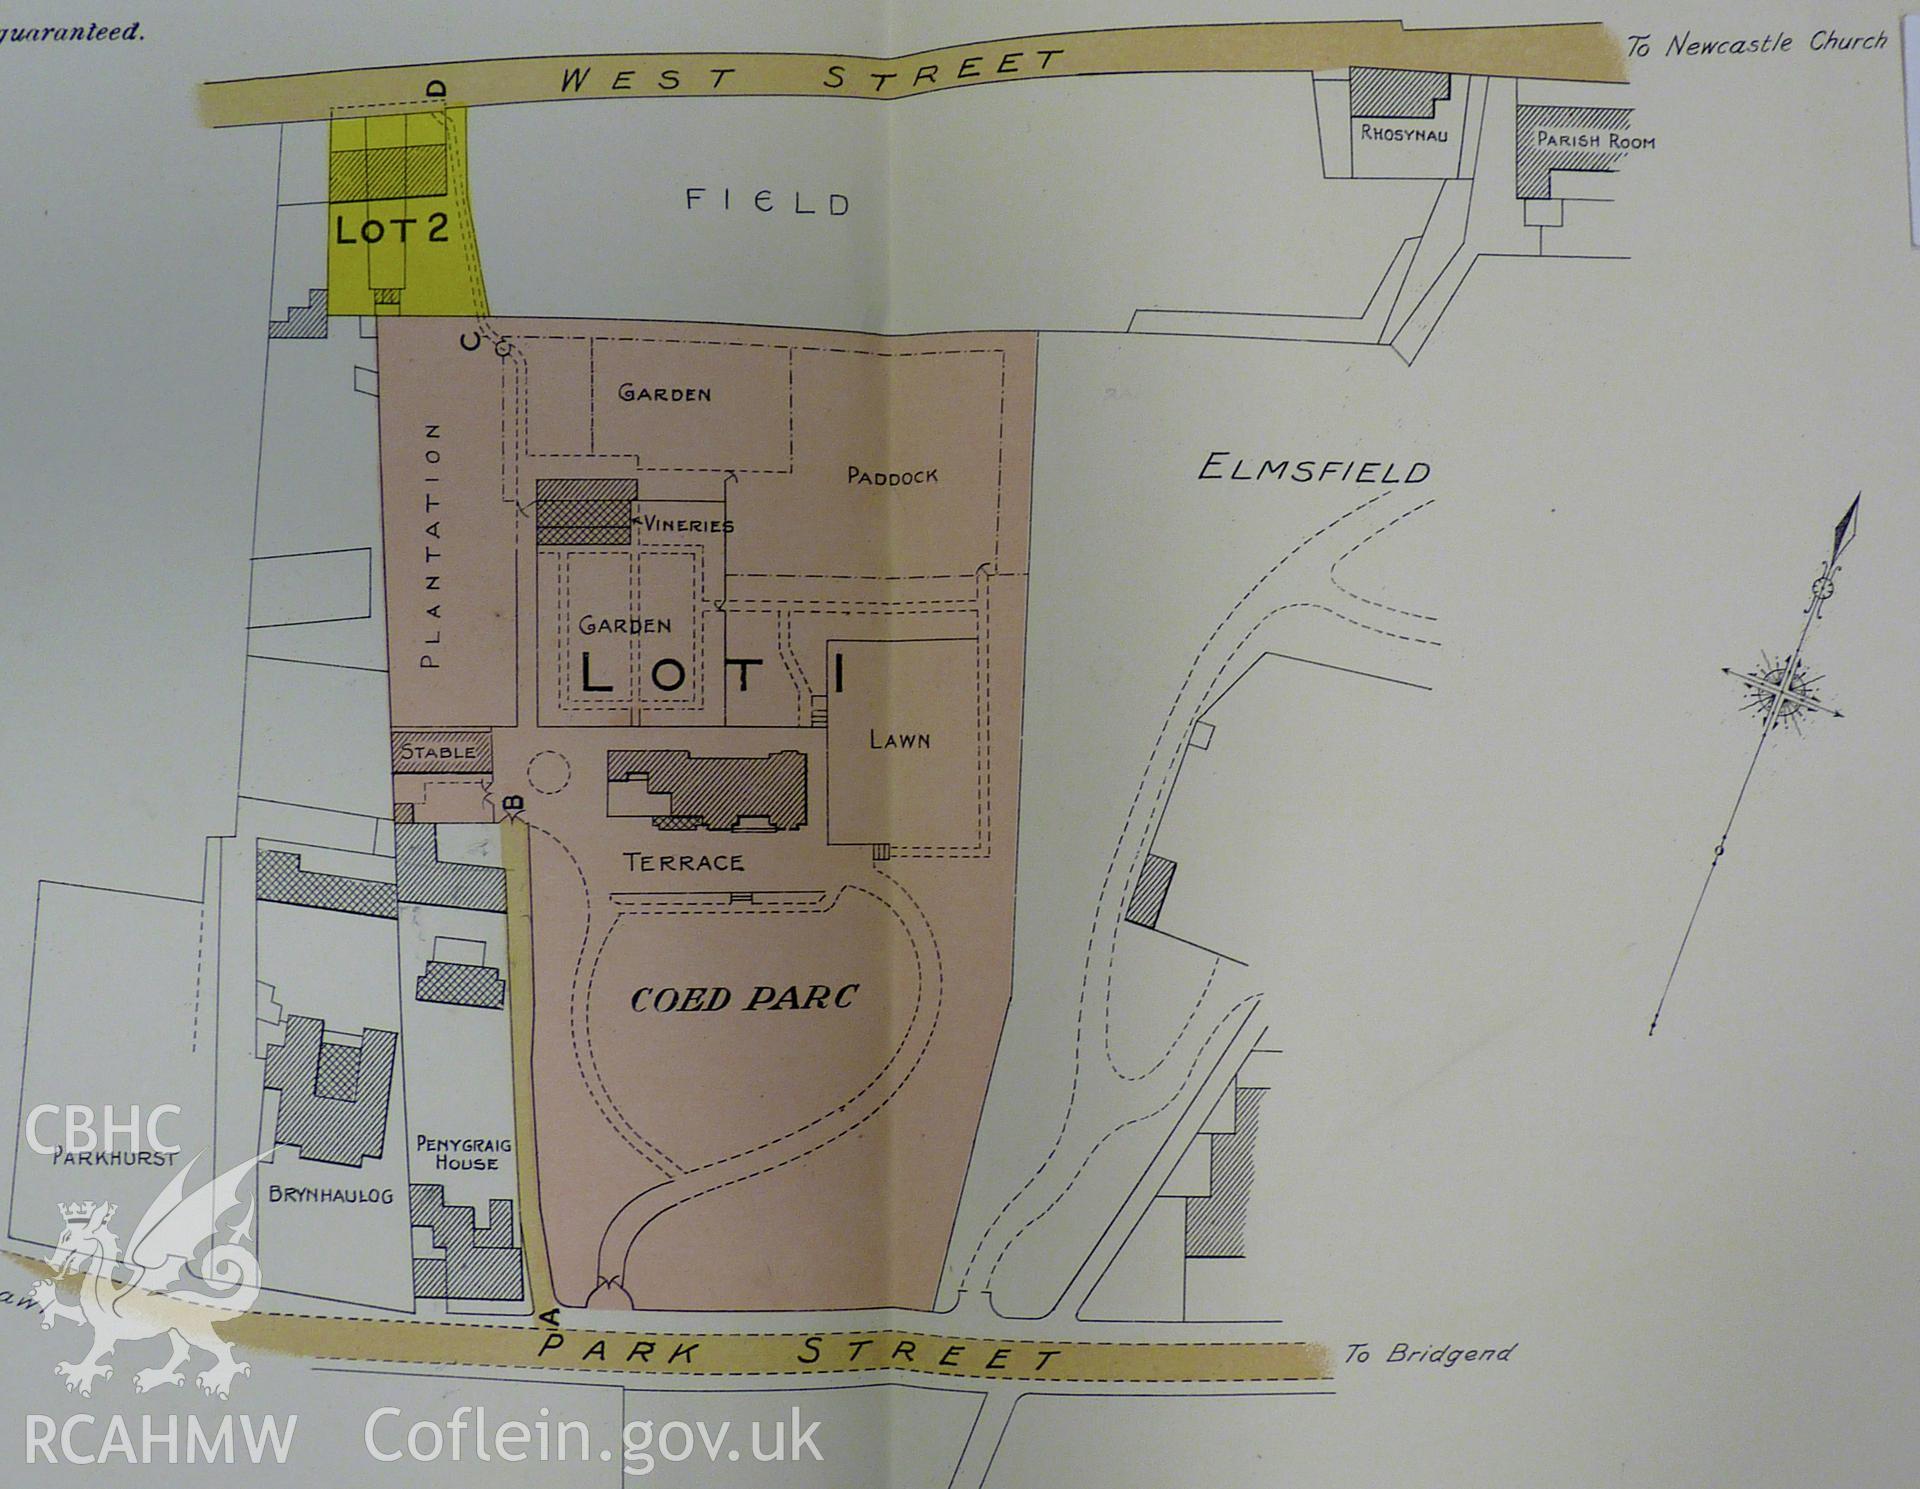 Sale Plan of Coed Park from 1909. Associated with archaeological work carried out at Coed Parc, Newcastle, Bridgend, by Archaeology Wales, 2016.